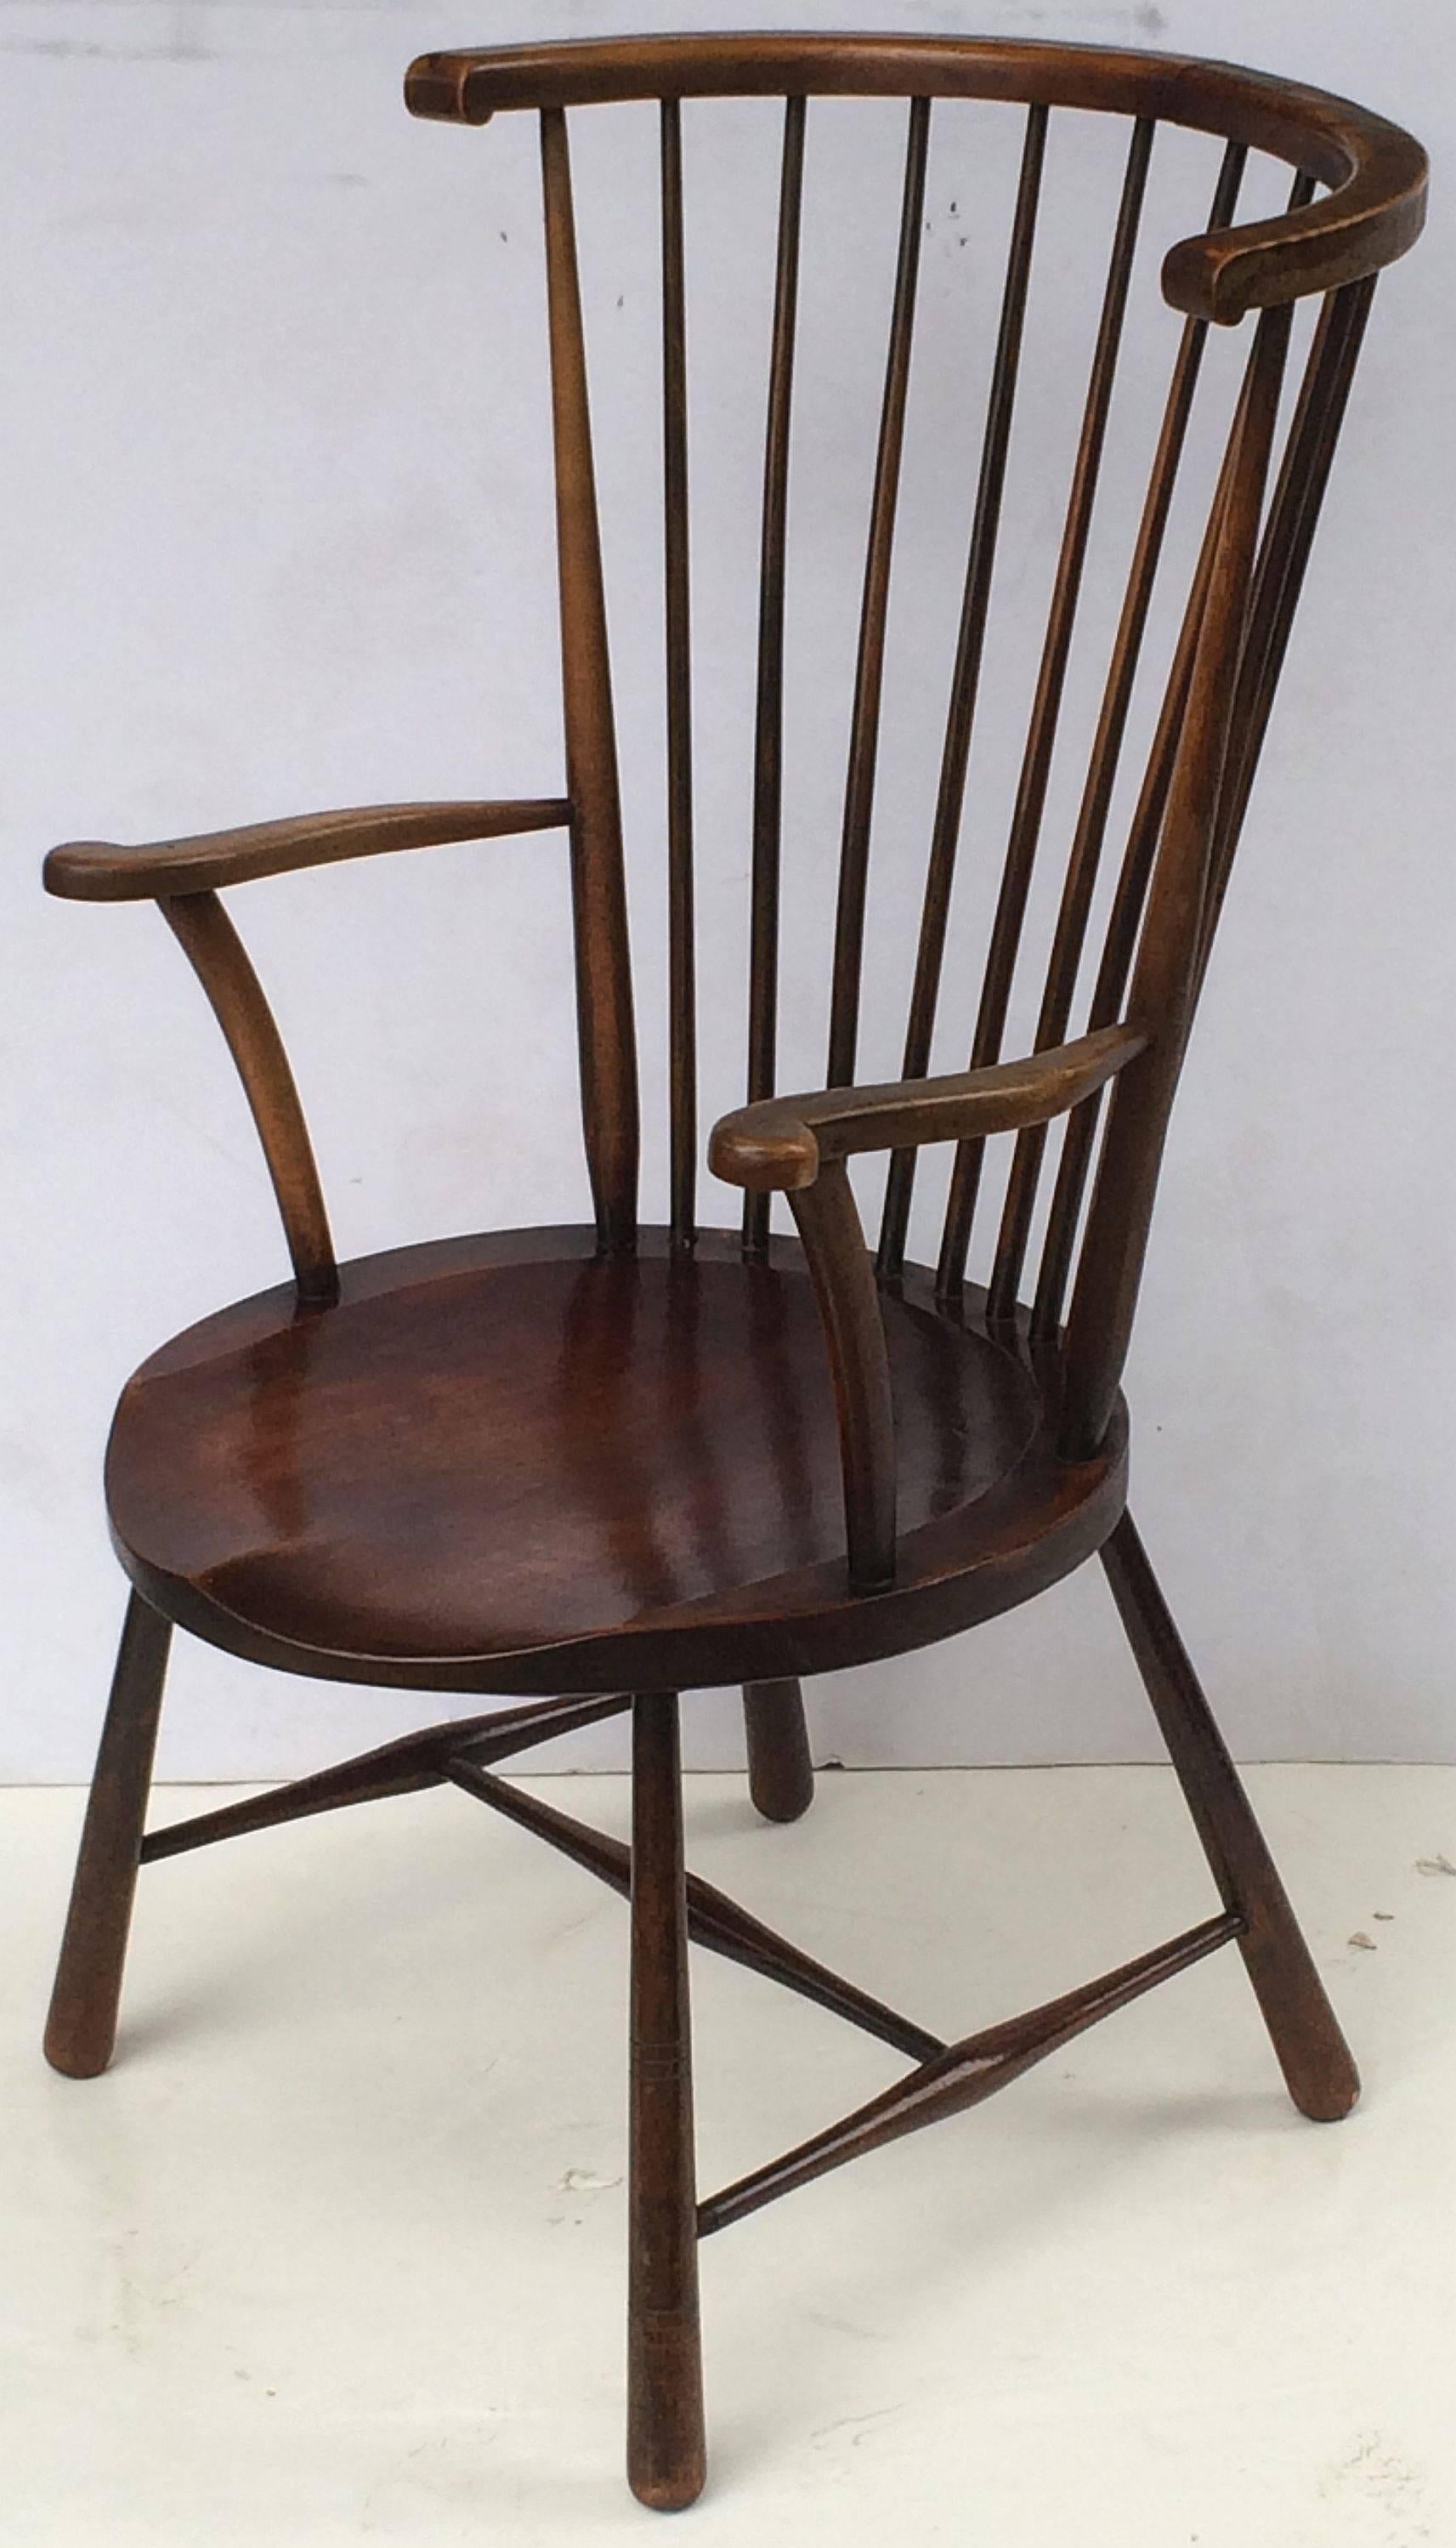 A fine English period Windsor armchair (or library chair) from the Arts and Crafts era.

